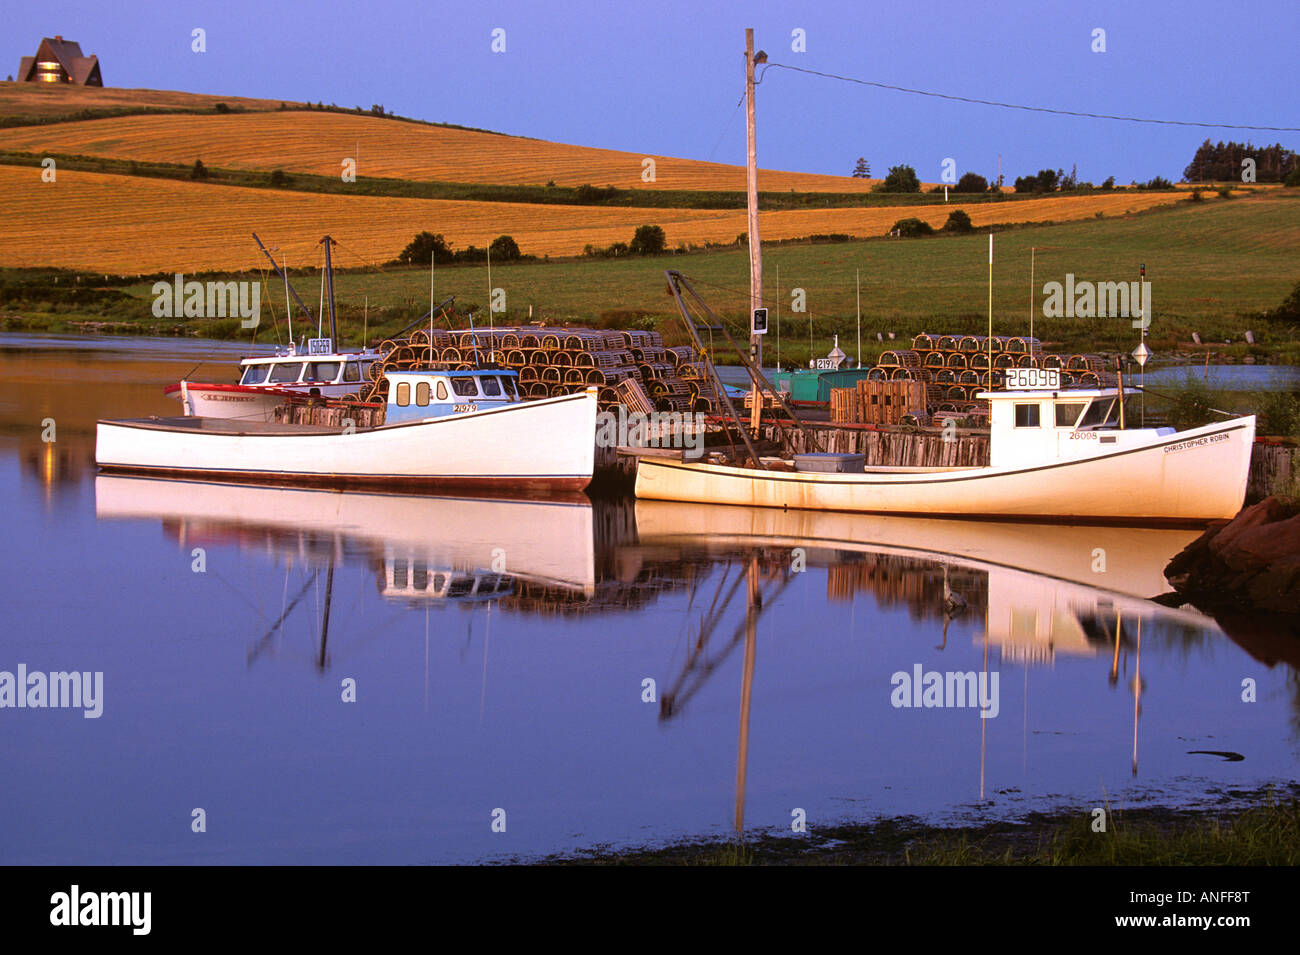 Angelboote/Fischerboote angedockt am Wharf, French River, Prince Edward Island, Canada Stockfoto